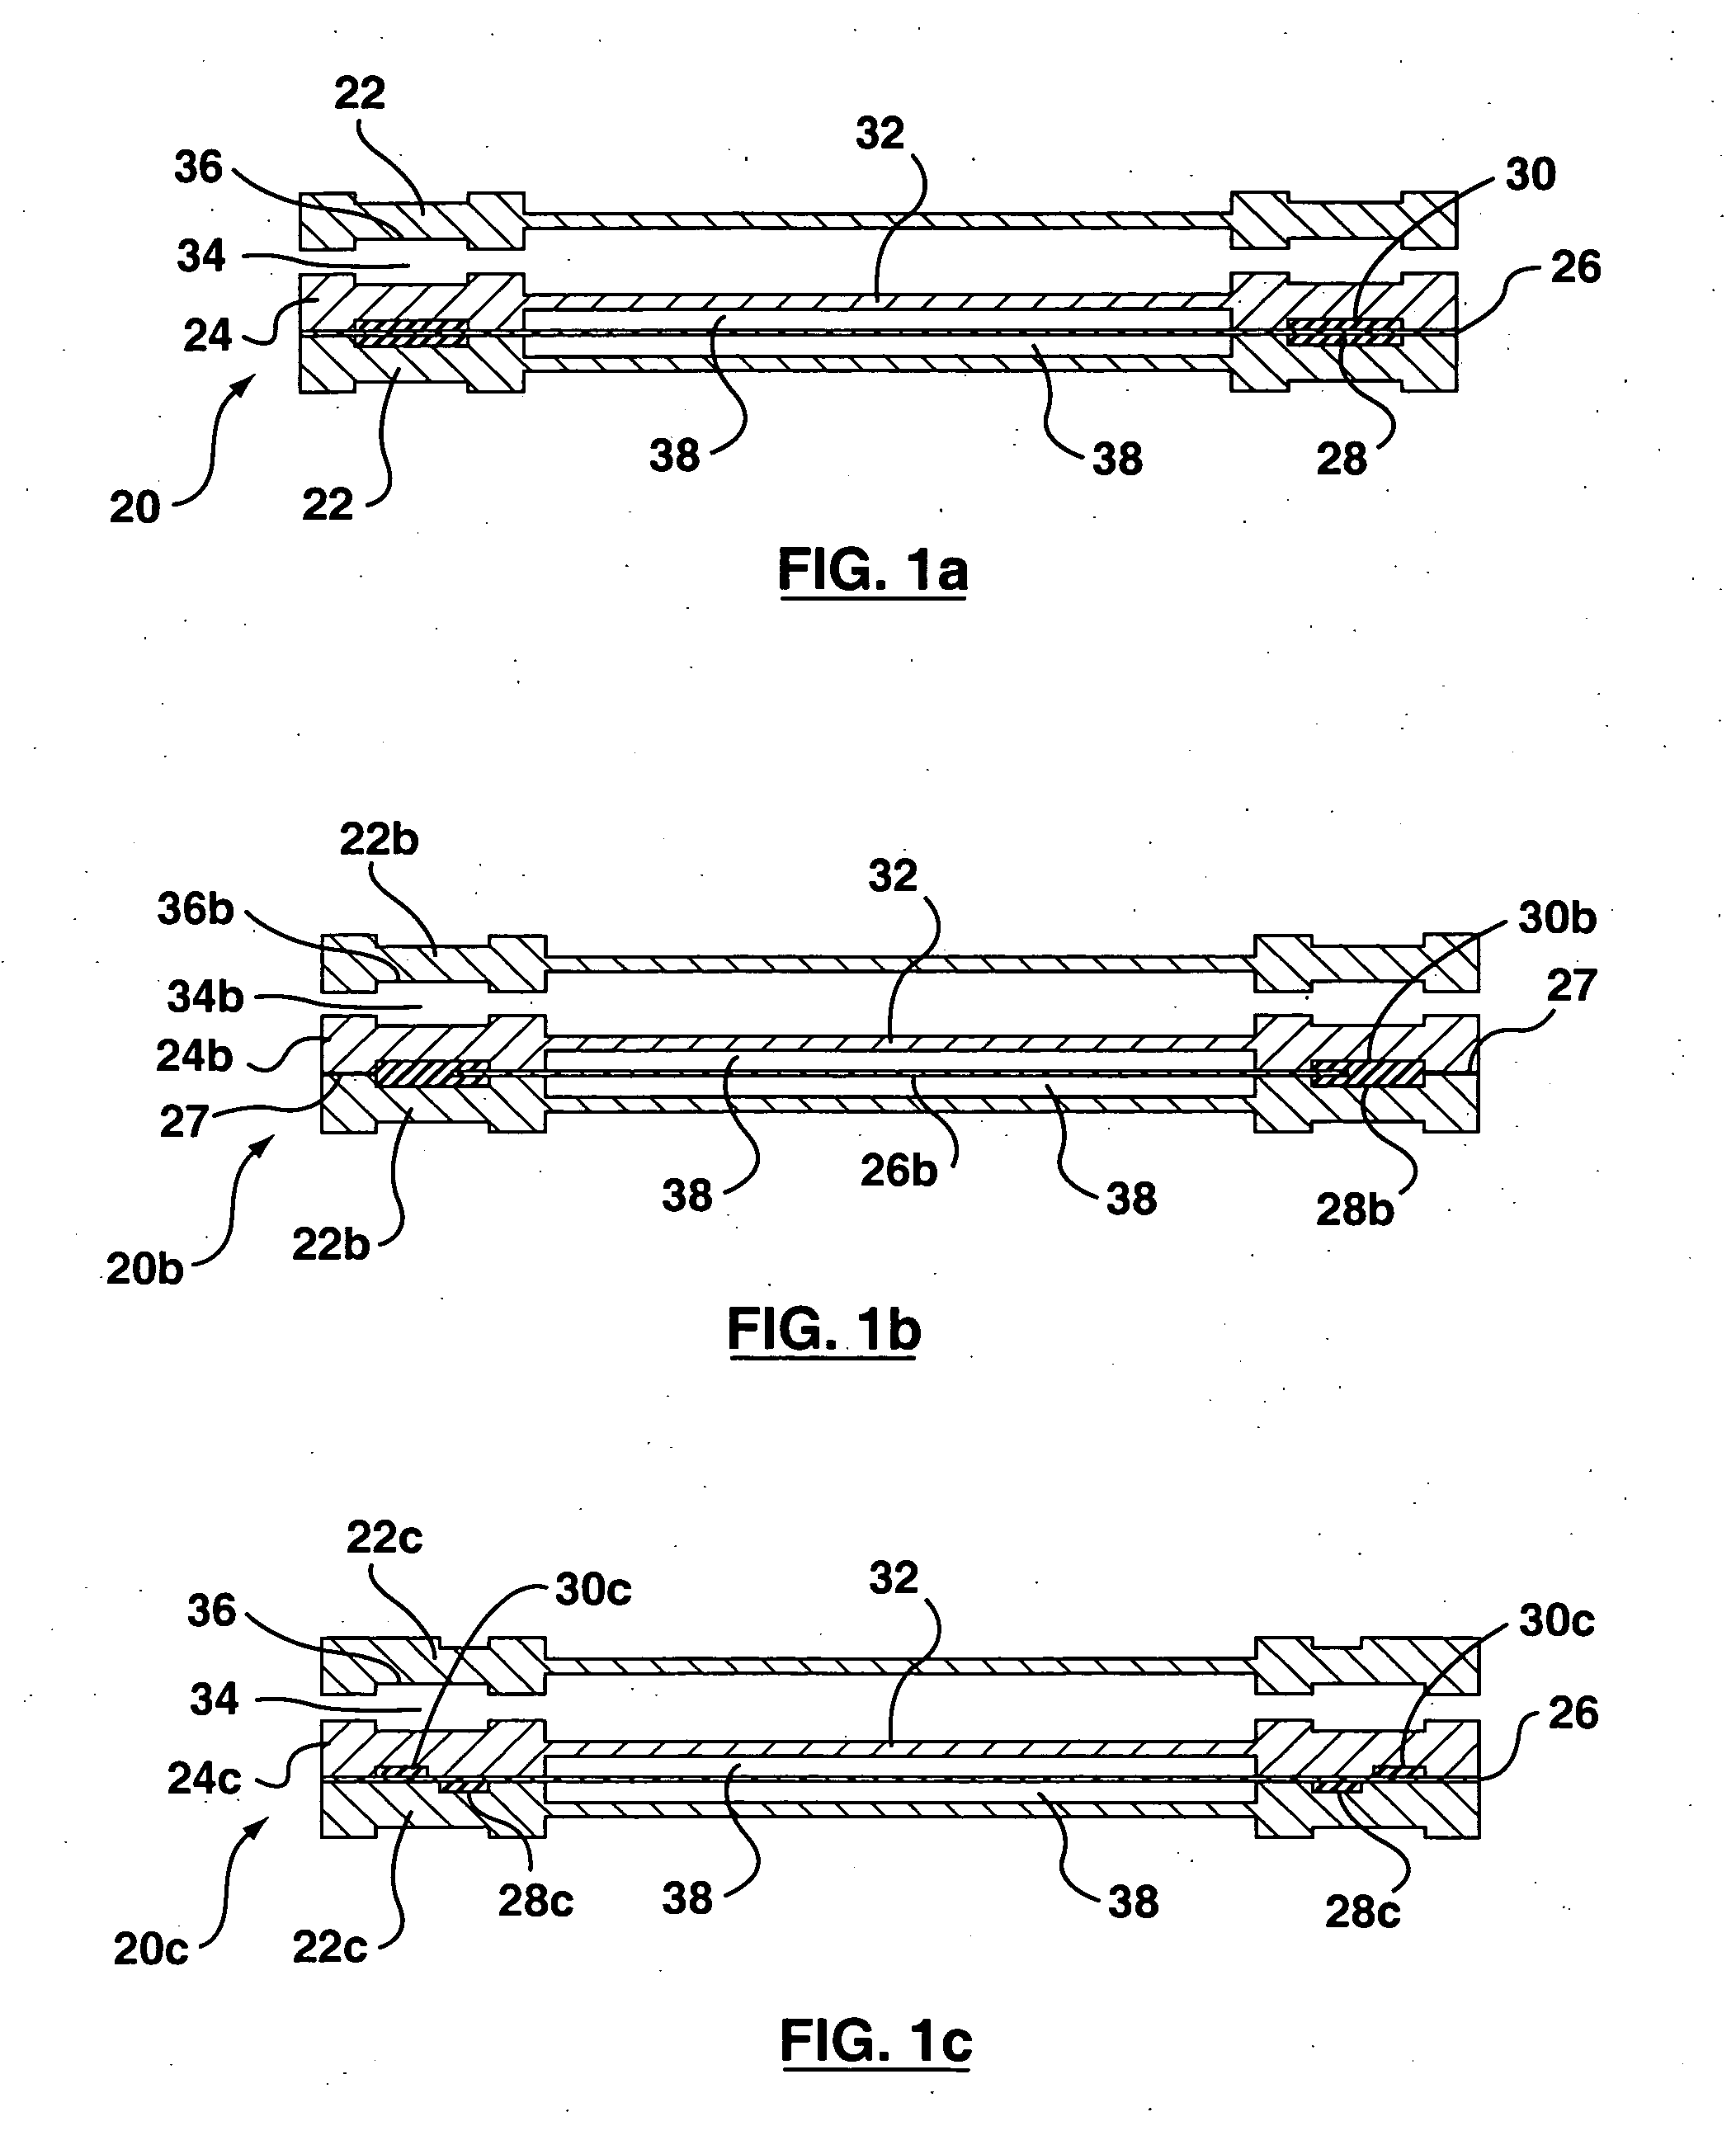 Apparatus for and method of forming seals in fuel cells and fuel stacks